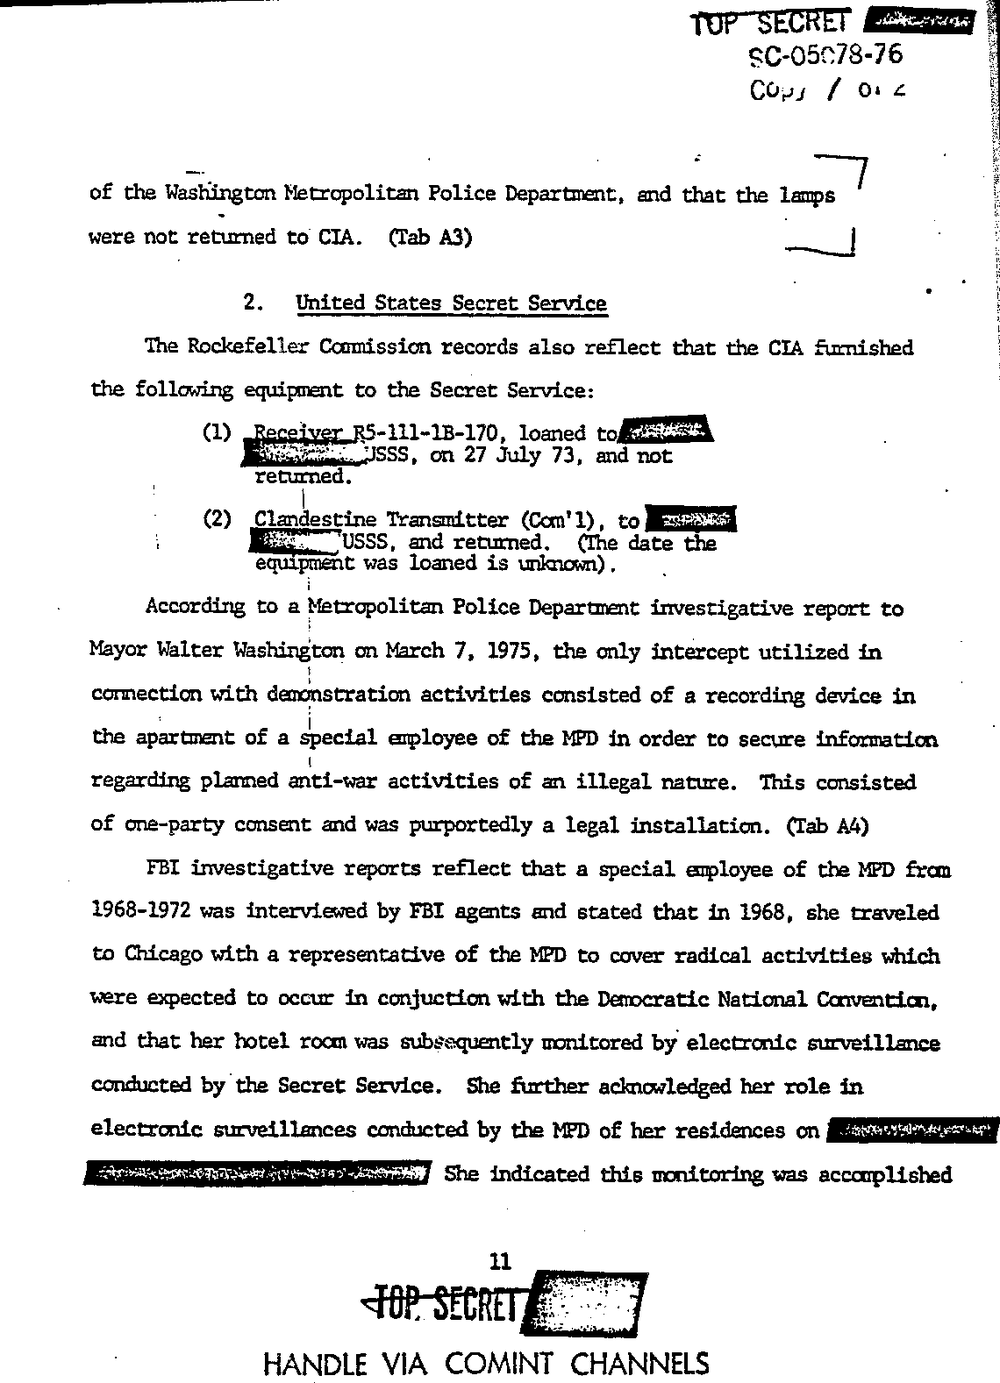 Page 19 from Report on Inquiry Into CIA Related Electronic Surveillance Activities